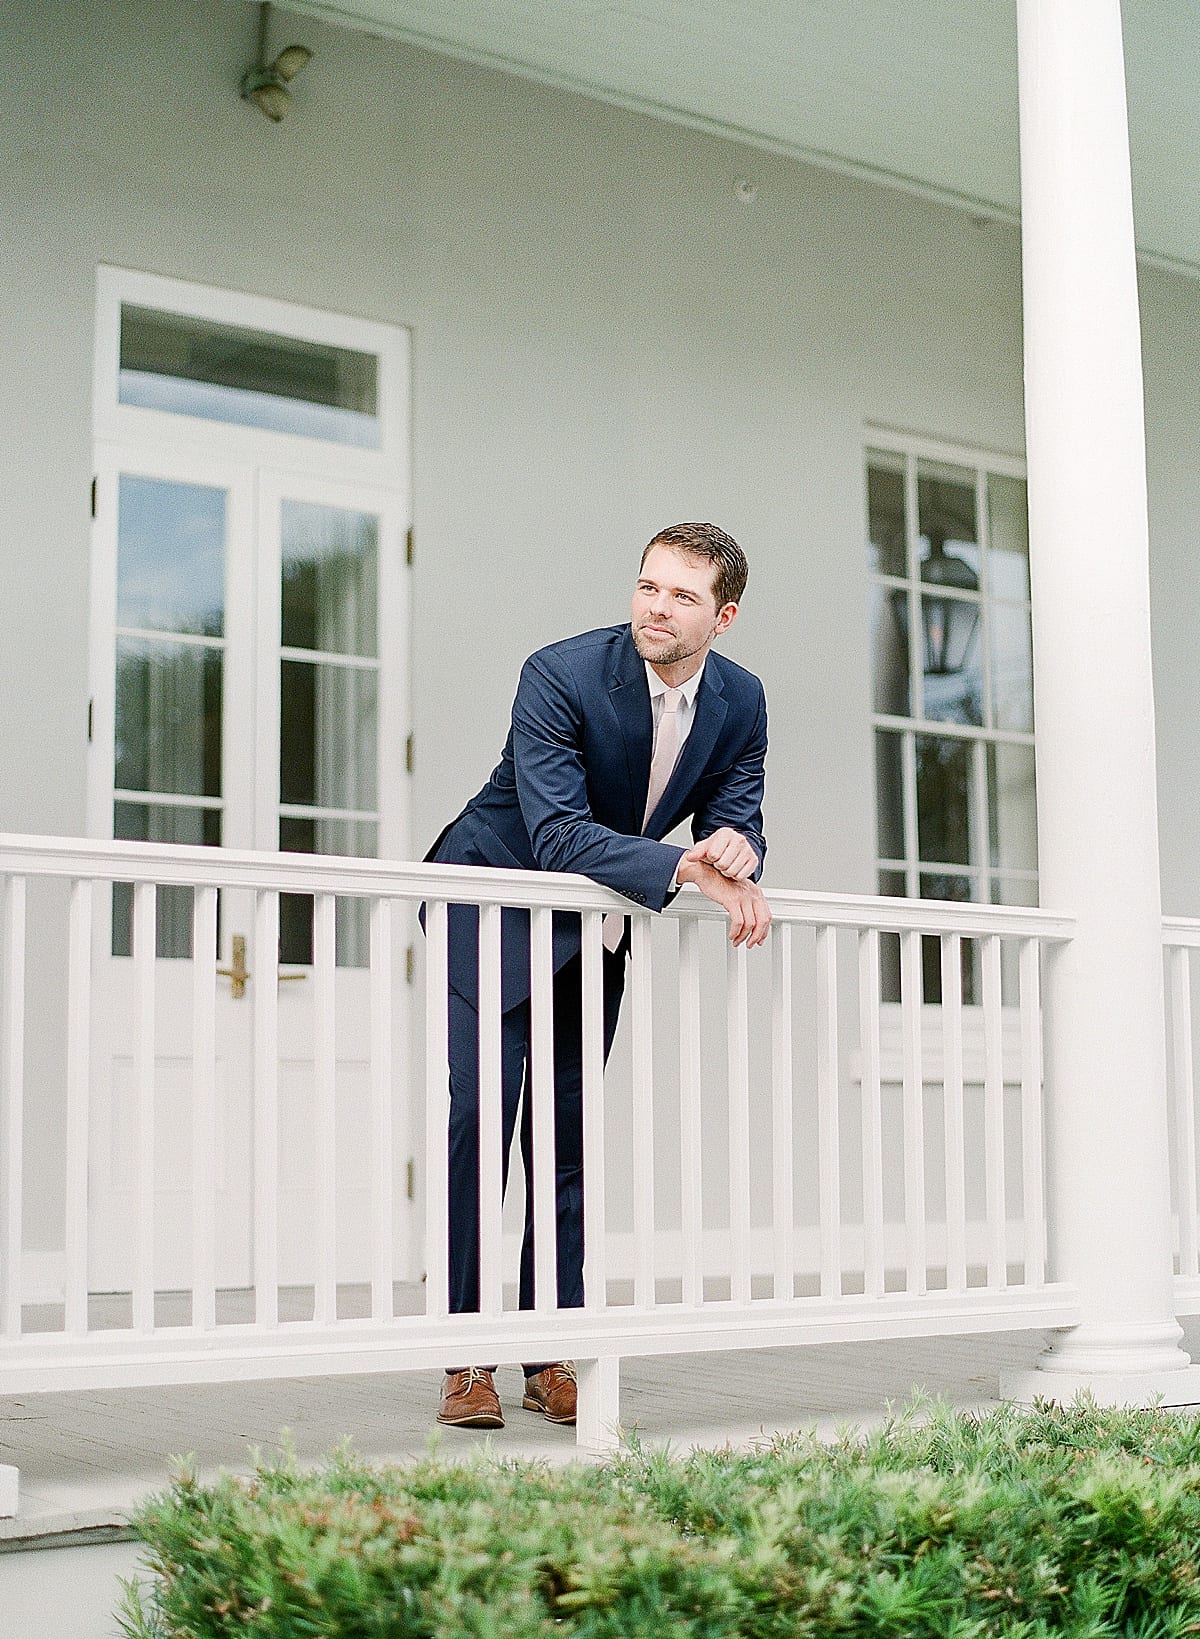 Handsome Guy in a Suit Leaning Over Railing Photo